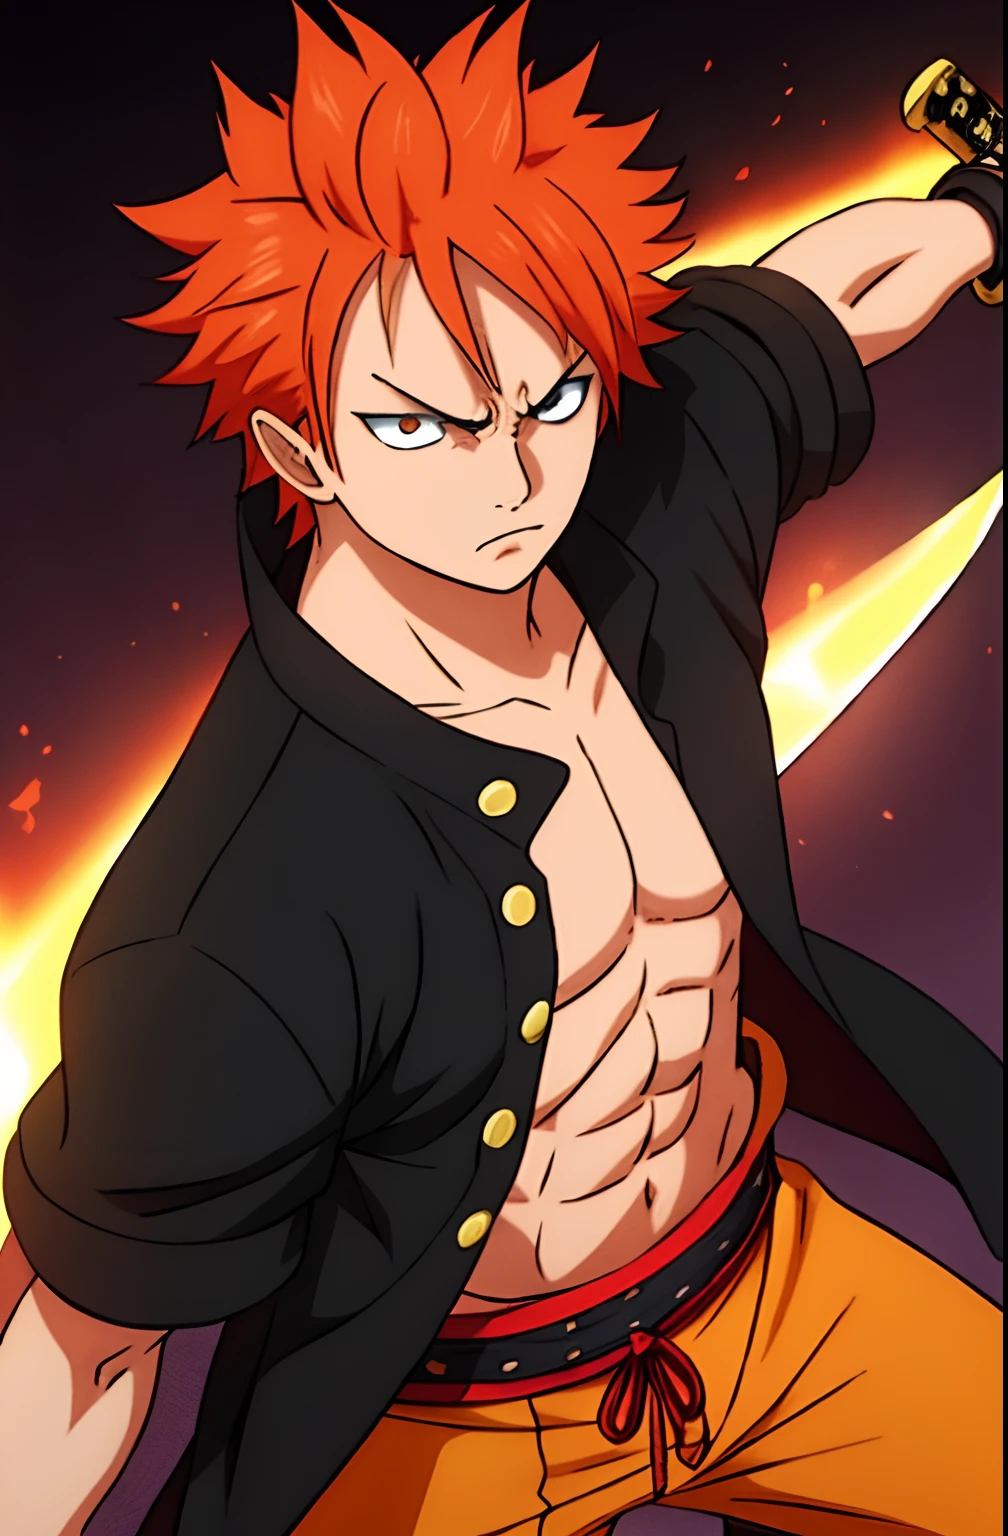 1boy, wanostyle, ichigo kurosaki, ginger hair, brown eyes, pirate captain, looking at viewer, holding a sword, Casual clothing options, Notable height, Strong-willed demeanor, Zangetsu, his iconic sword, Determined stance, Closely cropped hairstyle, Intense aura, Combat-ready posture, Energetic and determined personality